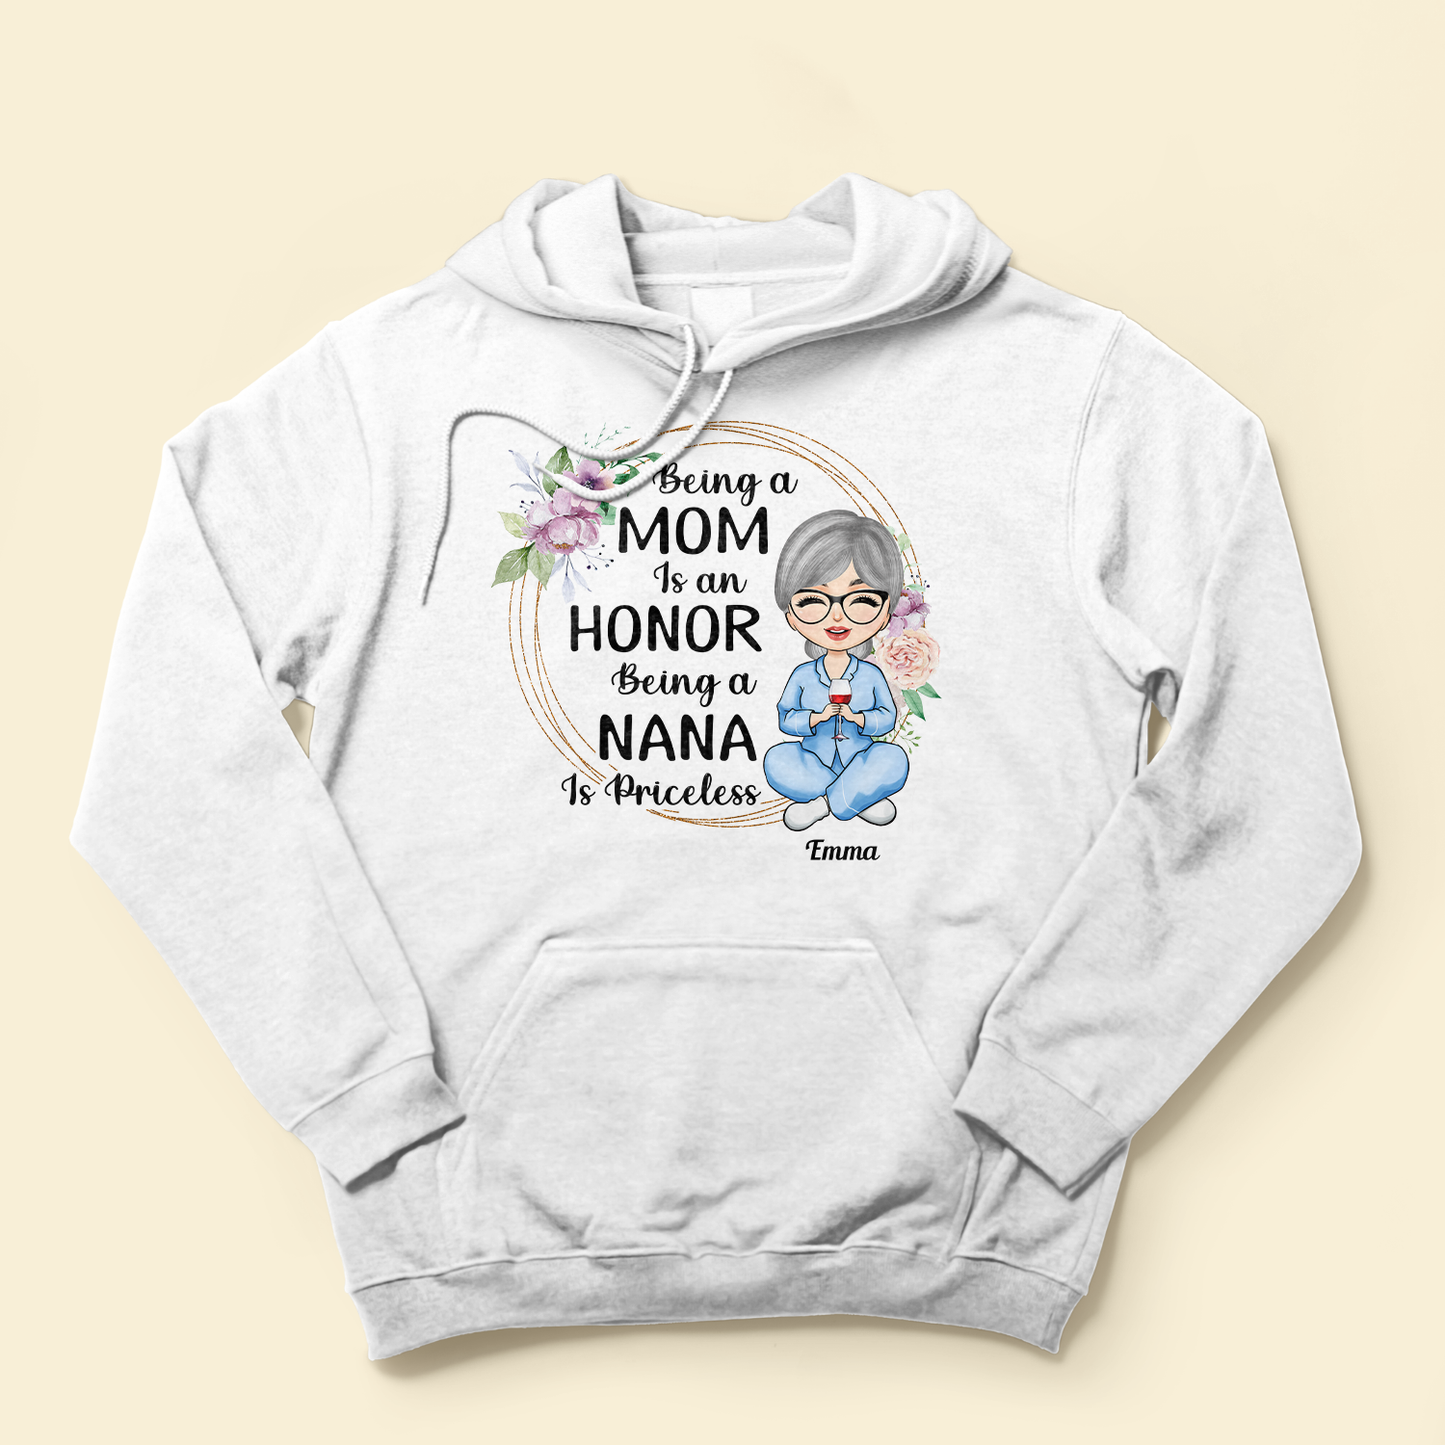 Being A Nana Is Priceless - Personalized Shirt - Birthday Mother's Day Gift For Grandma, Nana - Gift From Daughters, Sons, Husband